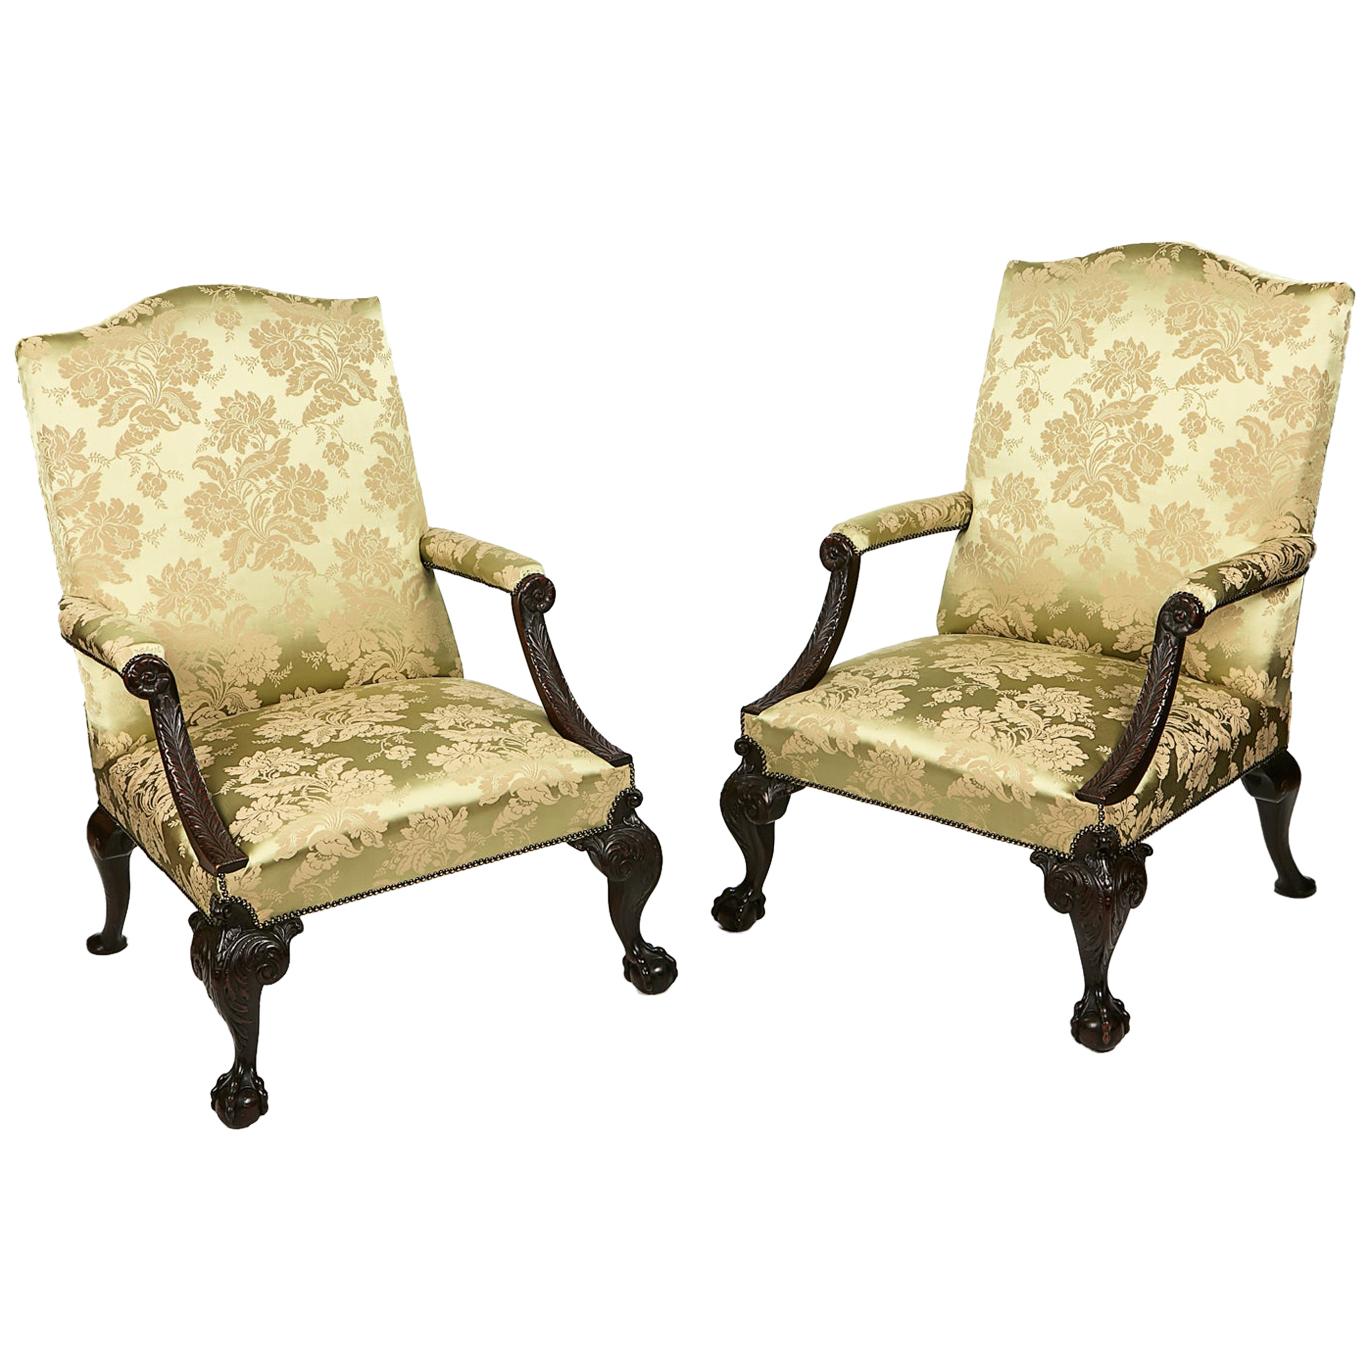 Early 19th Century Pair of Gainsborough Armchairs For Sale